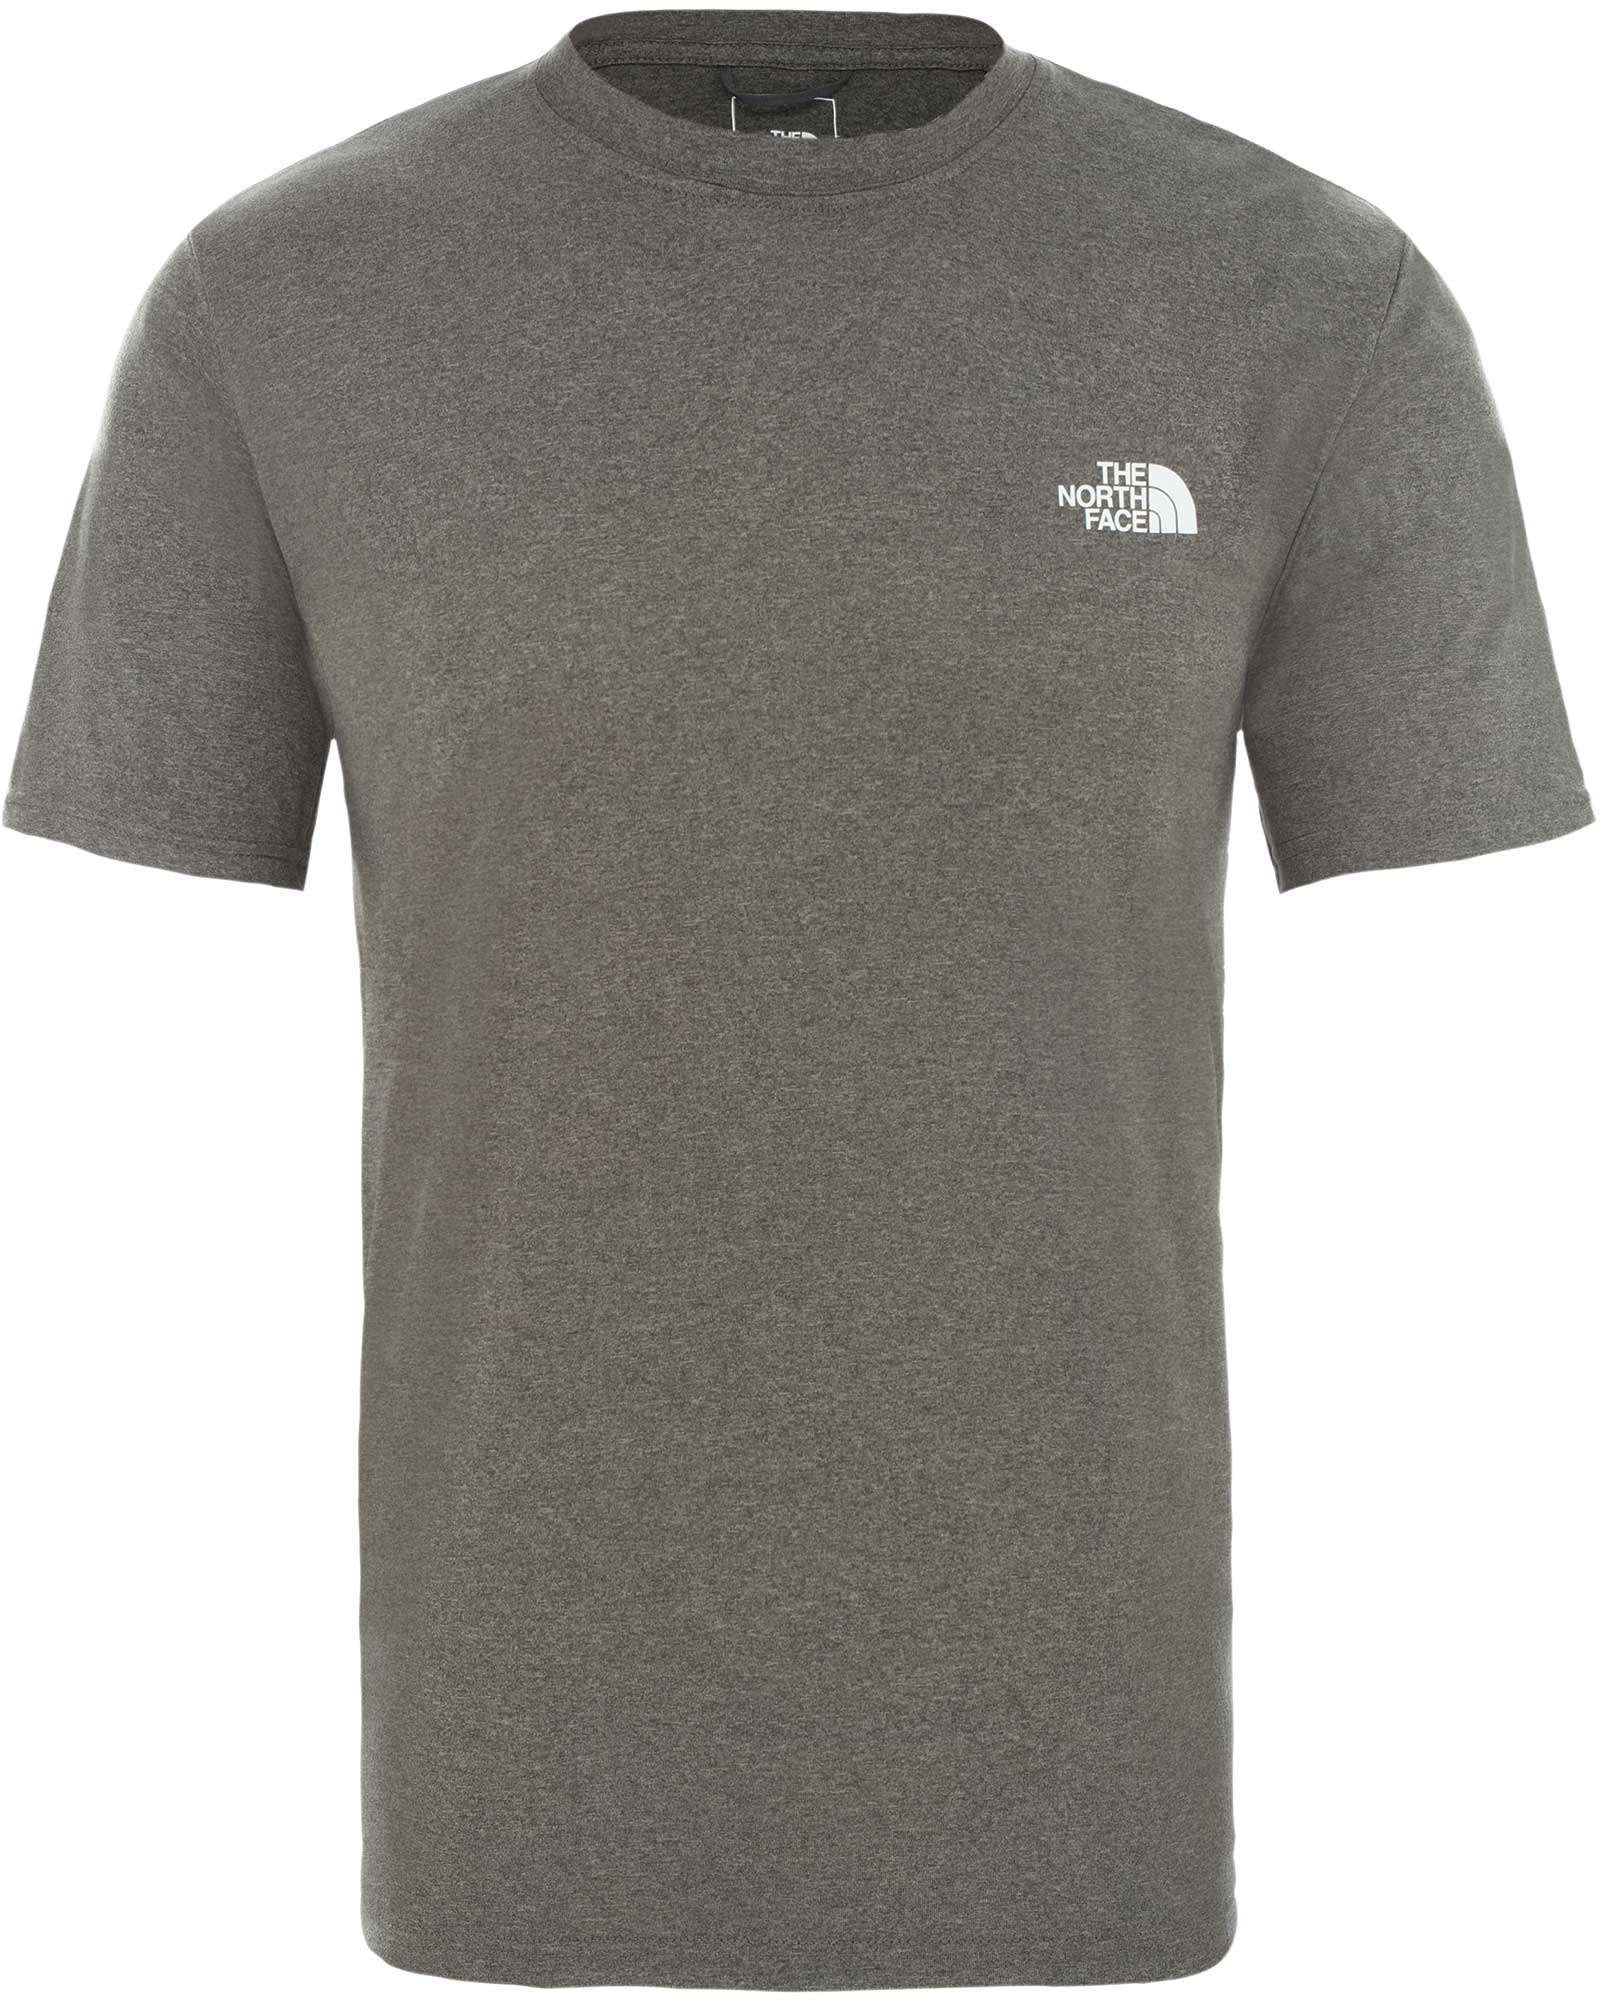 The North Face Reaxion Amp Men’s Crew T Shirt - New Taupe Green Heather S